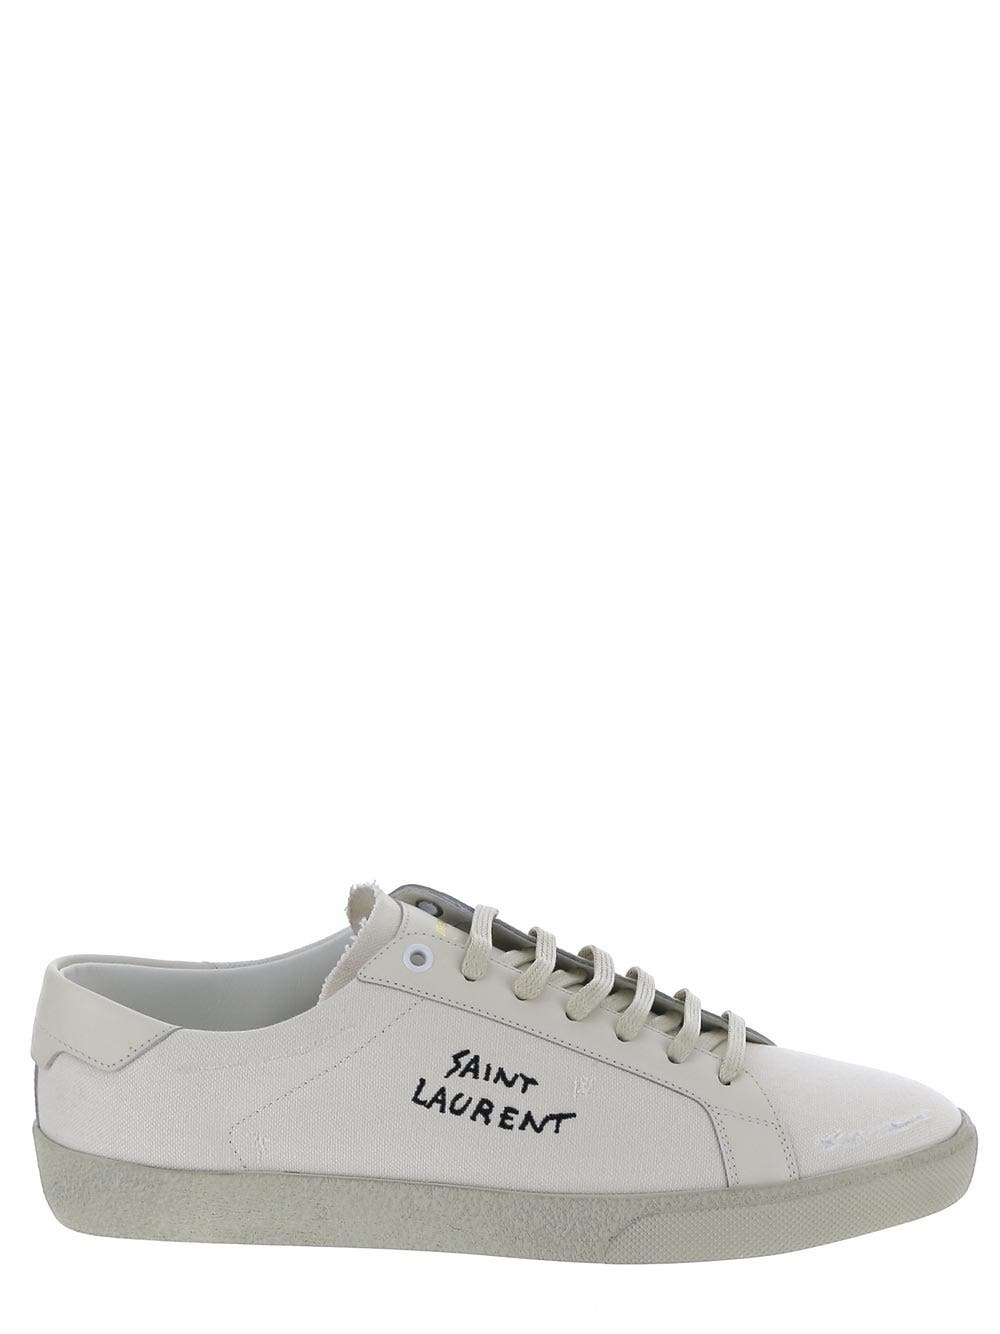 Court Classic SL/06 Embroidered Sneakers - 1